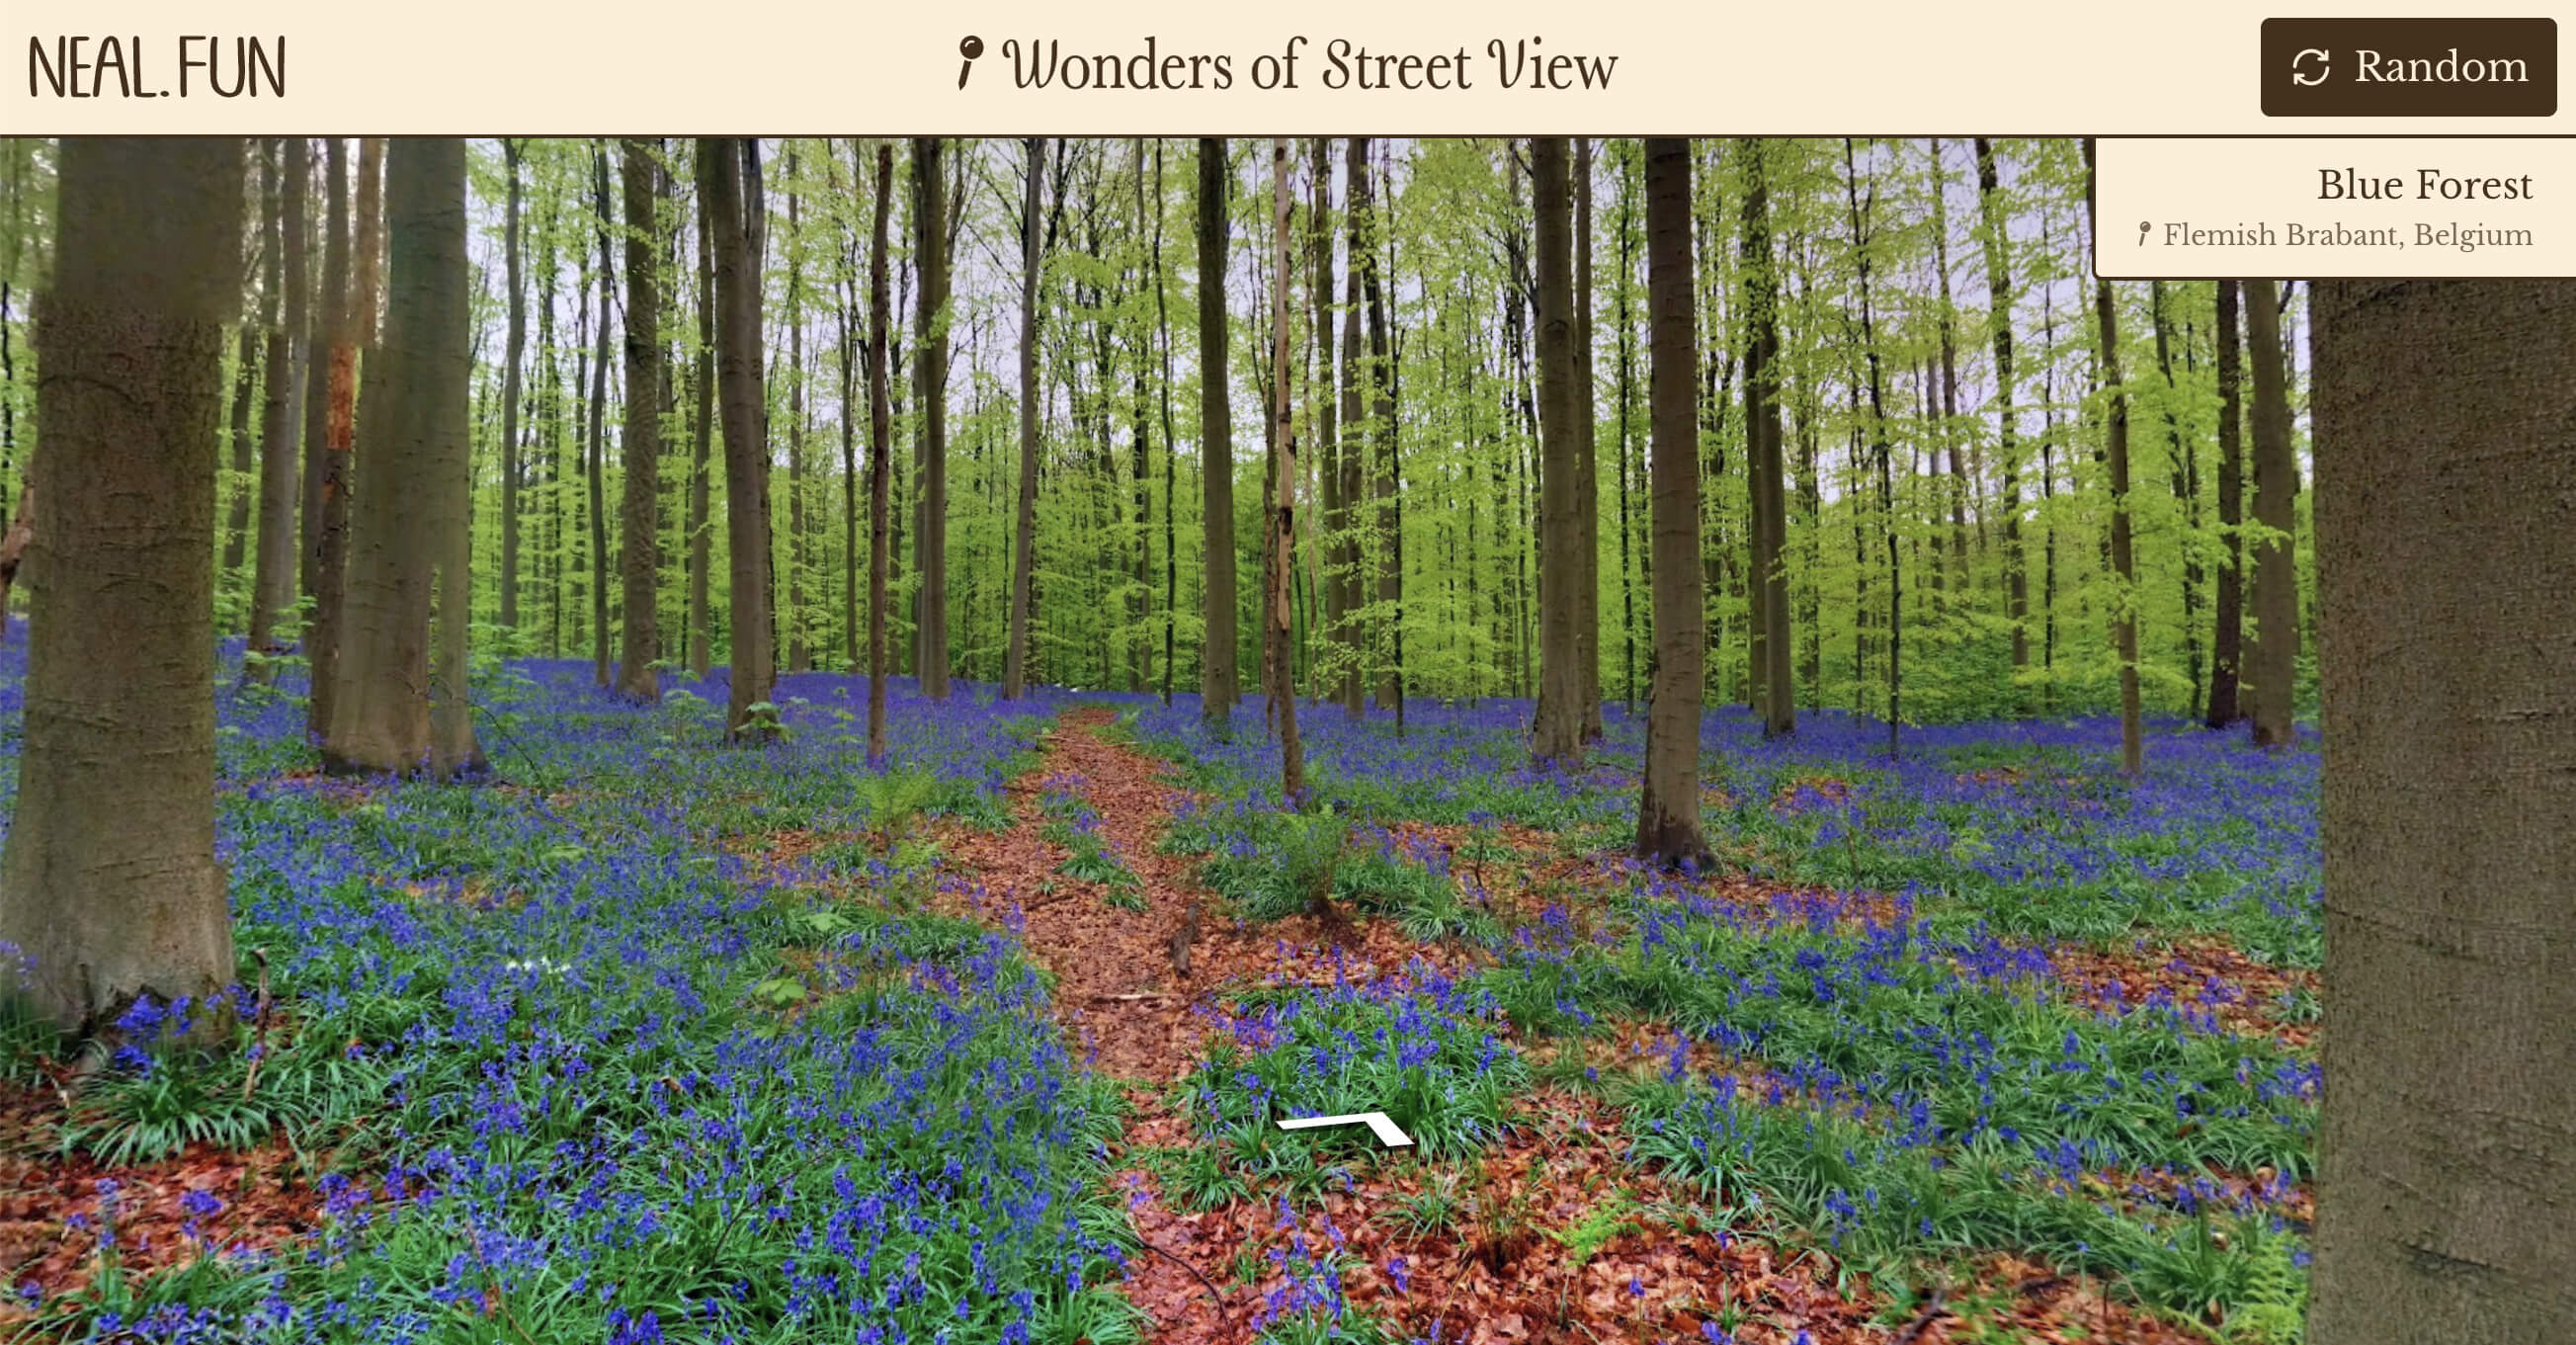 Blue Forest in Flemish Brabant, Belgium: forest of tall but narrow trees and the ground is covered in blue flowers